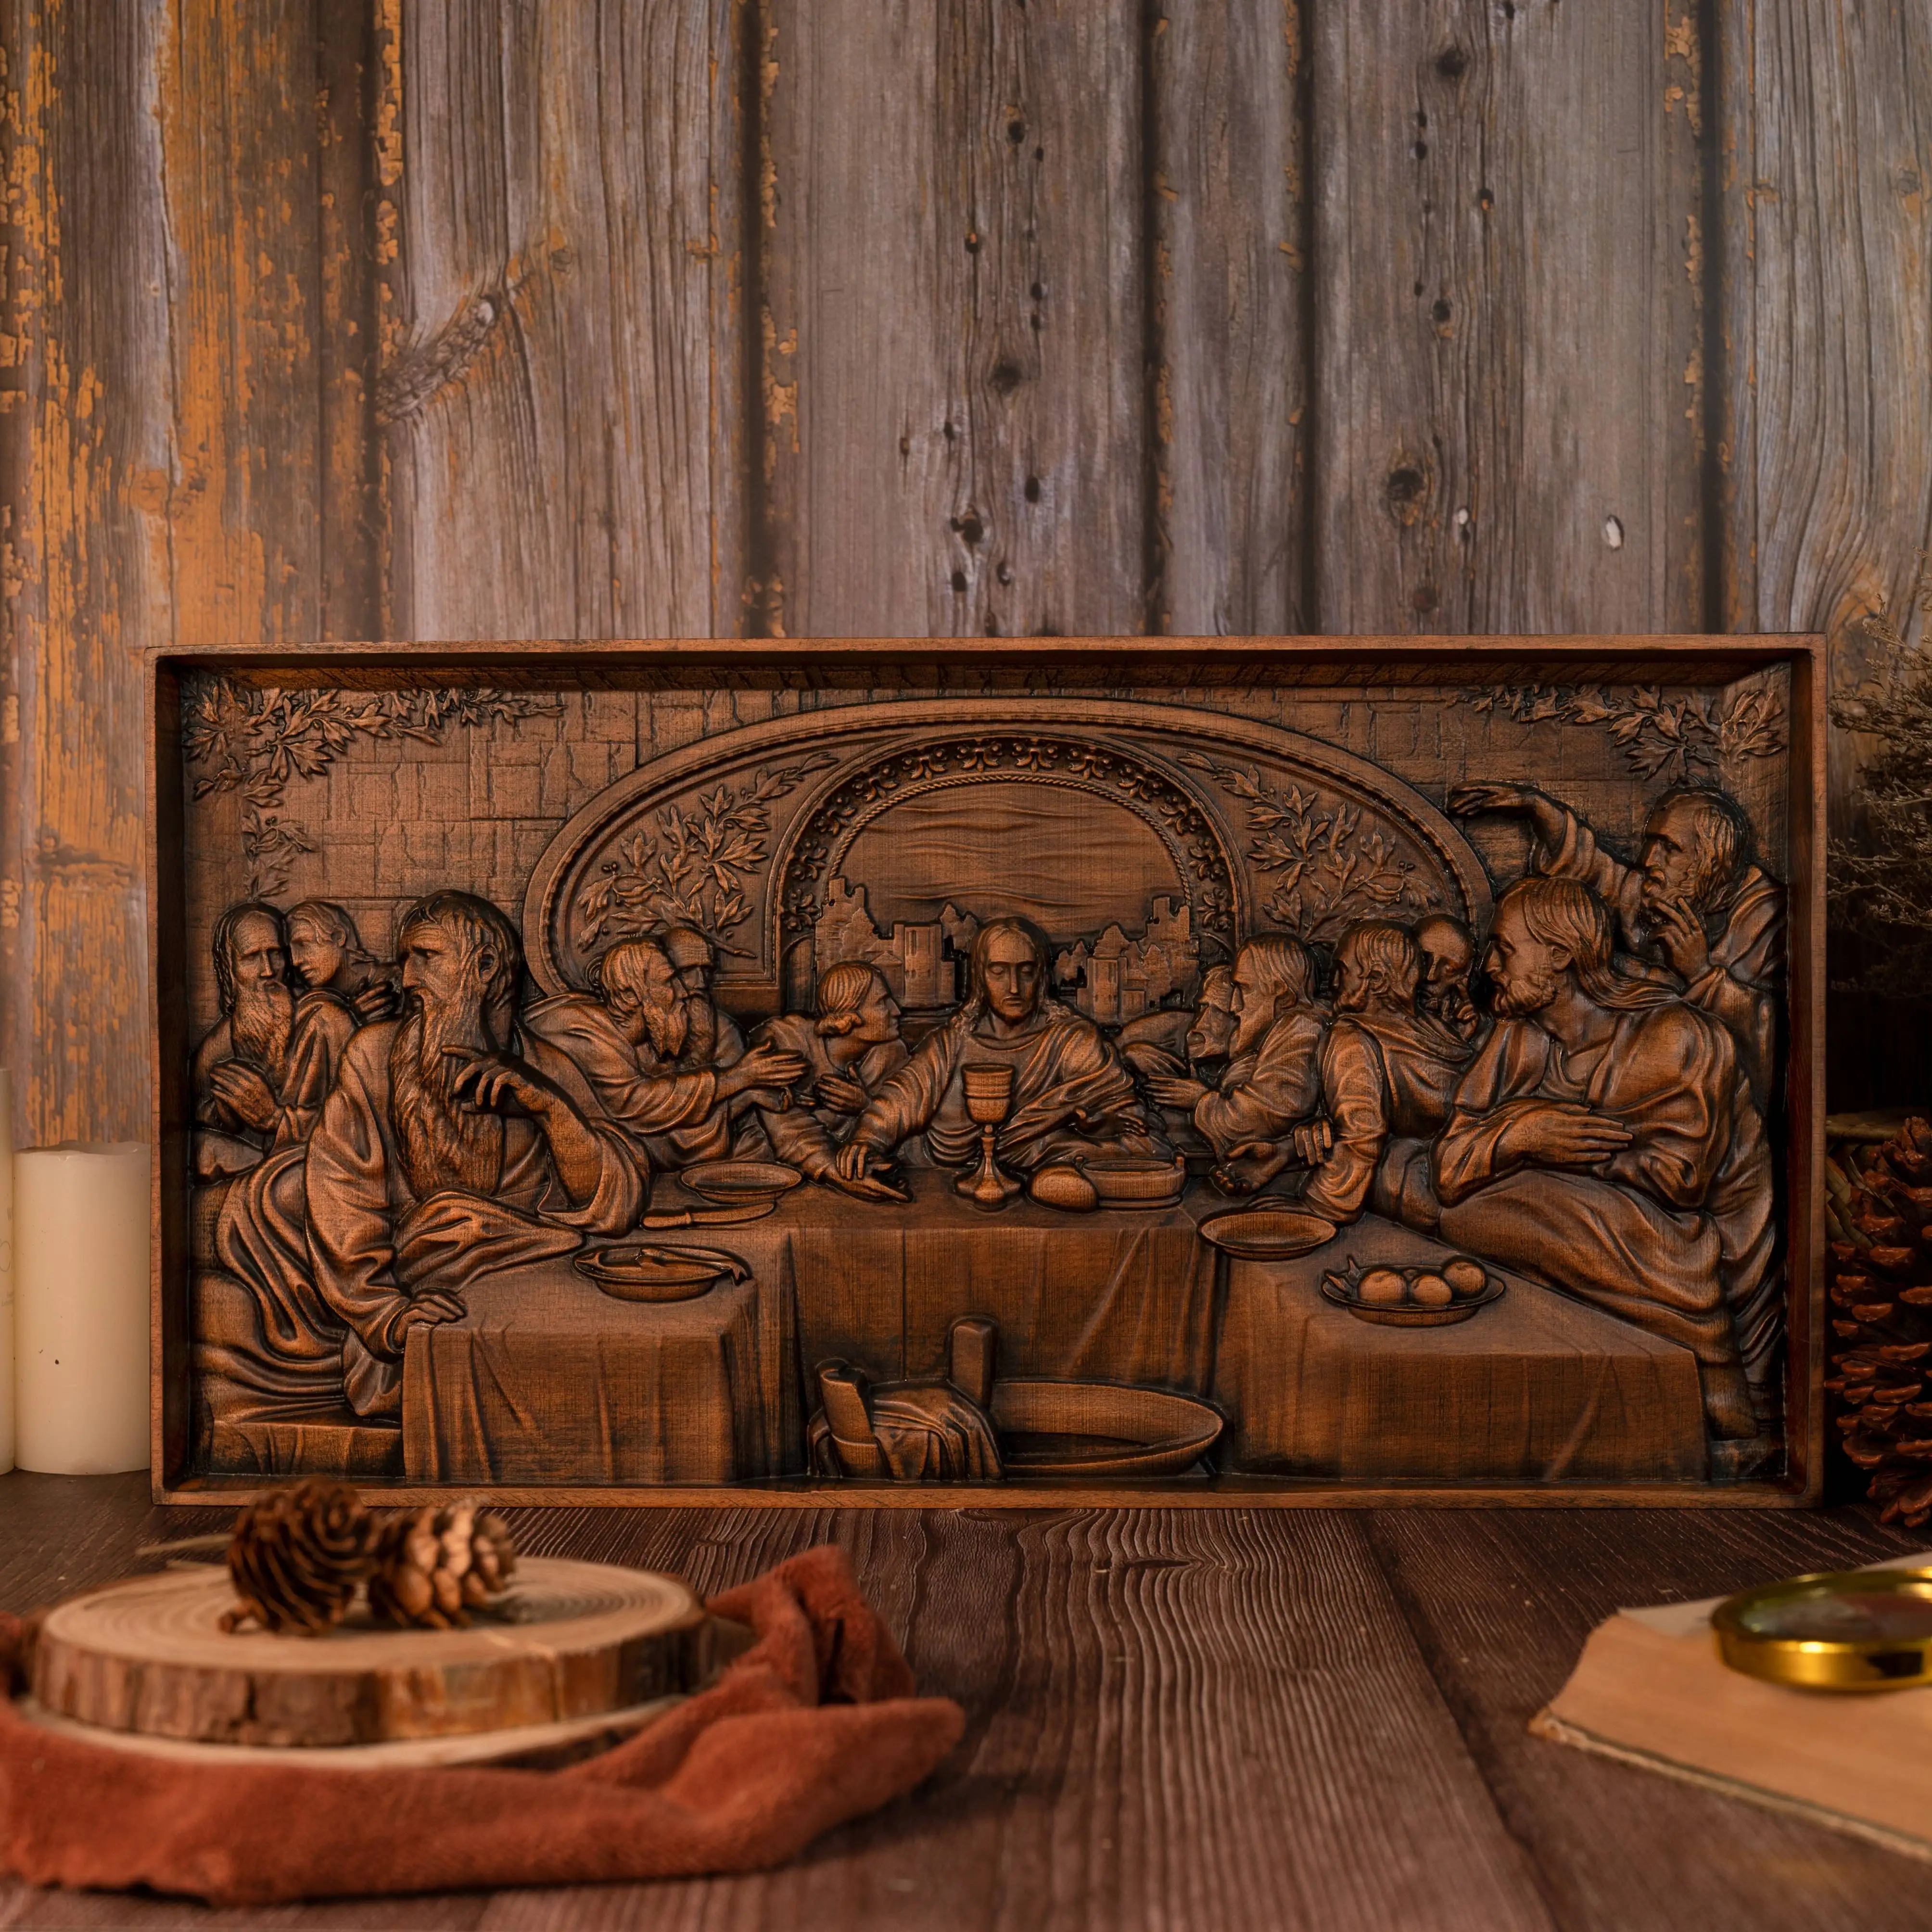 

last supper catholic religion saints statue bible jesus wood carving plaque christian icon church wall decoration christmas gift